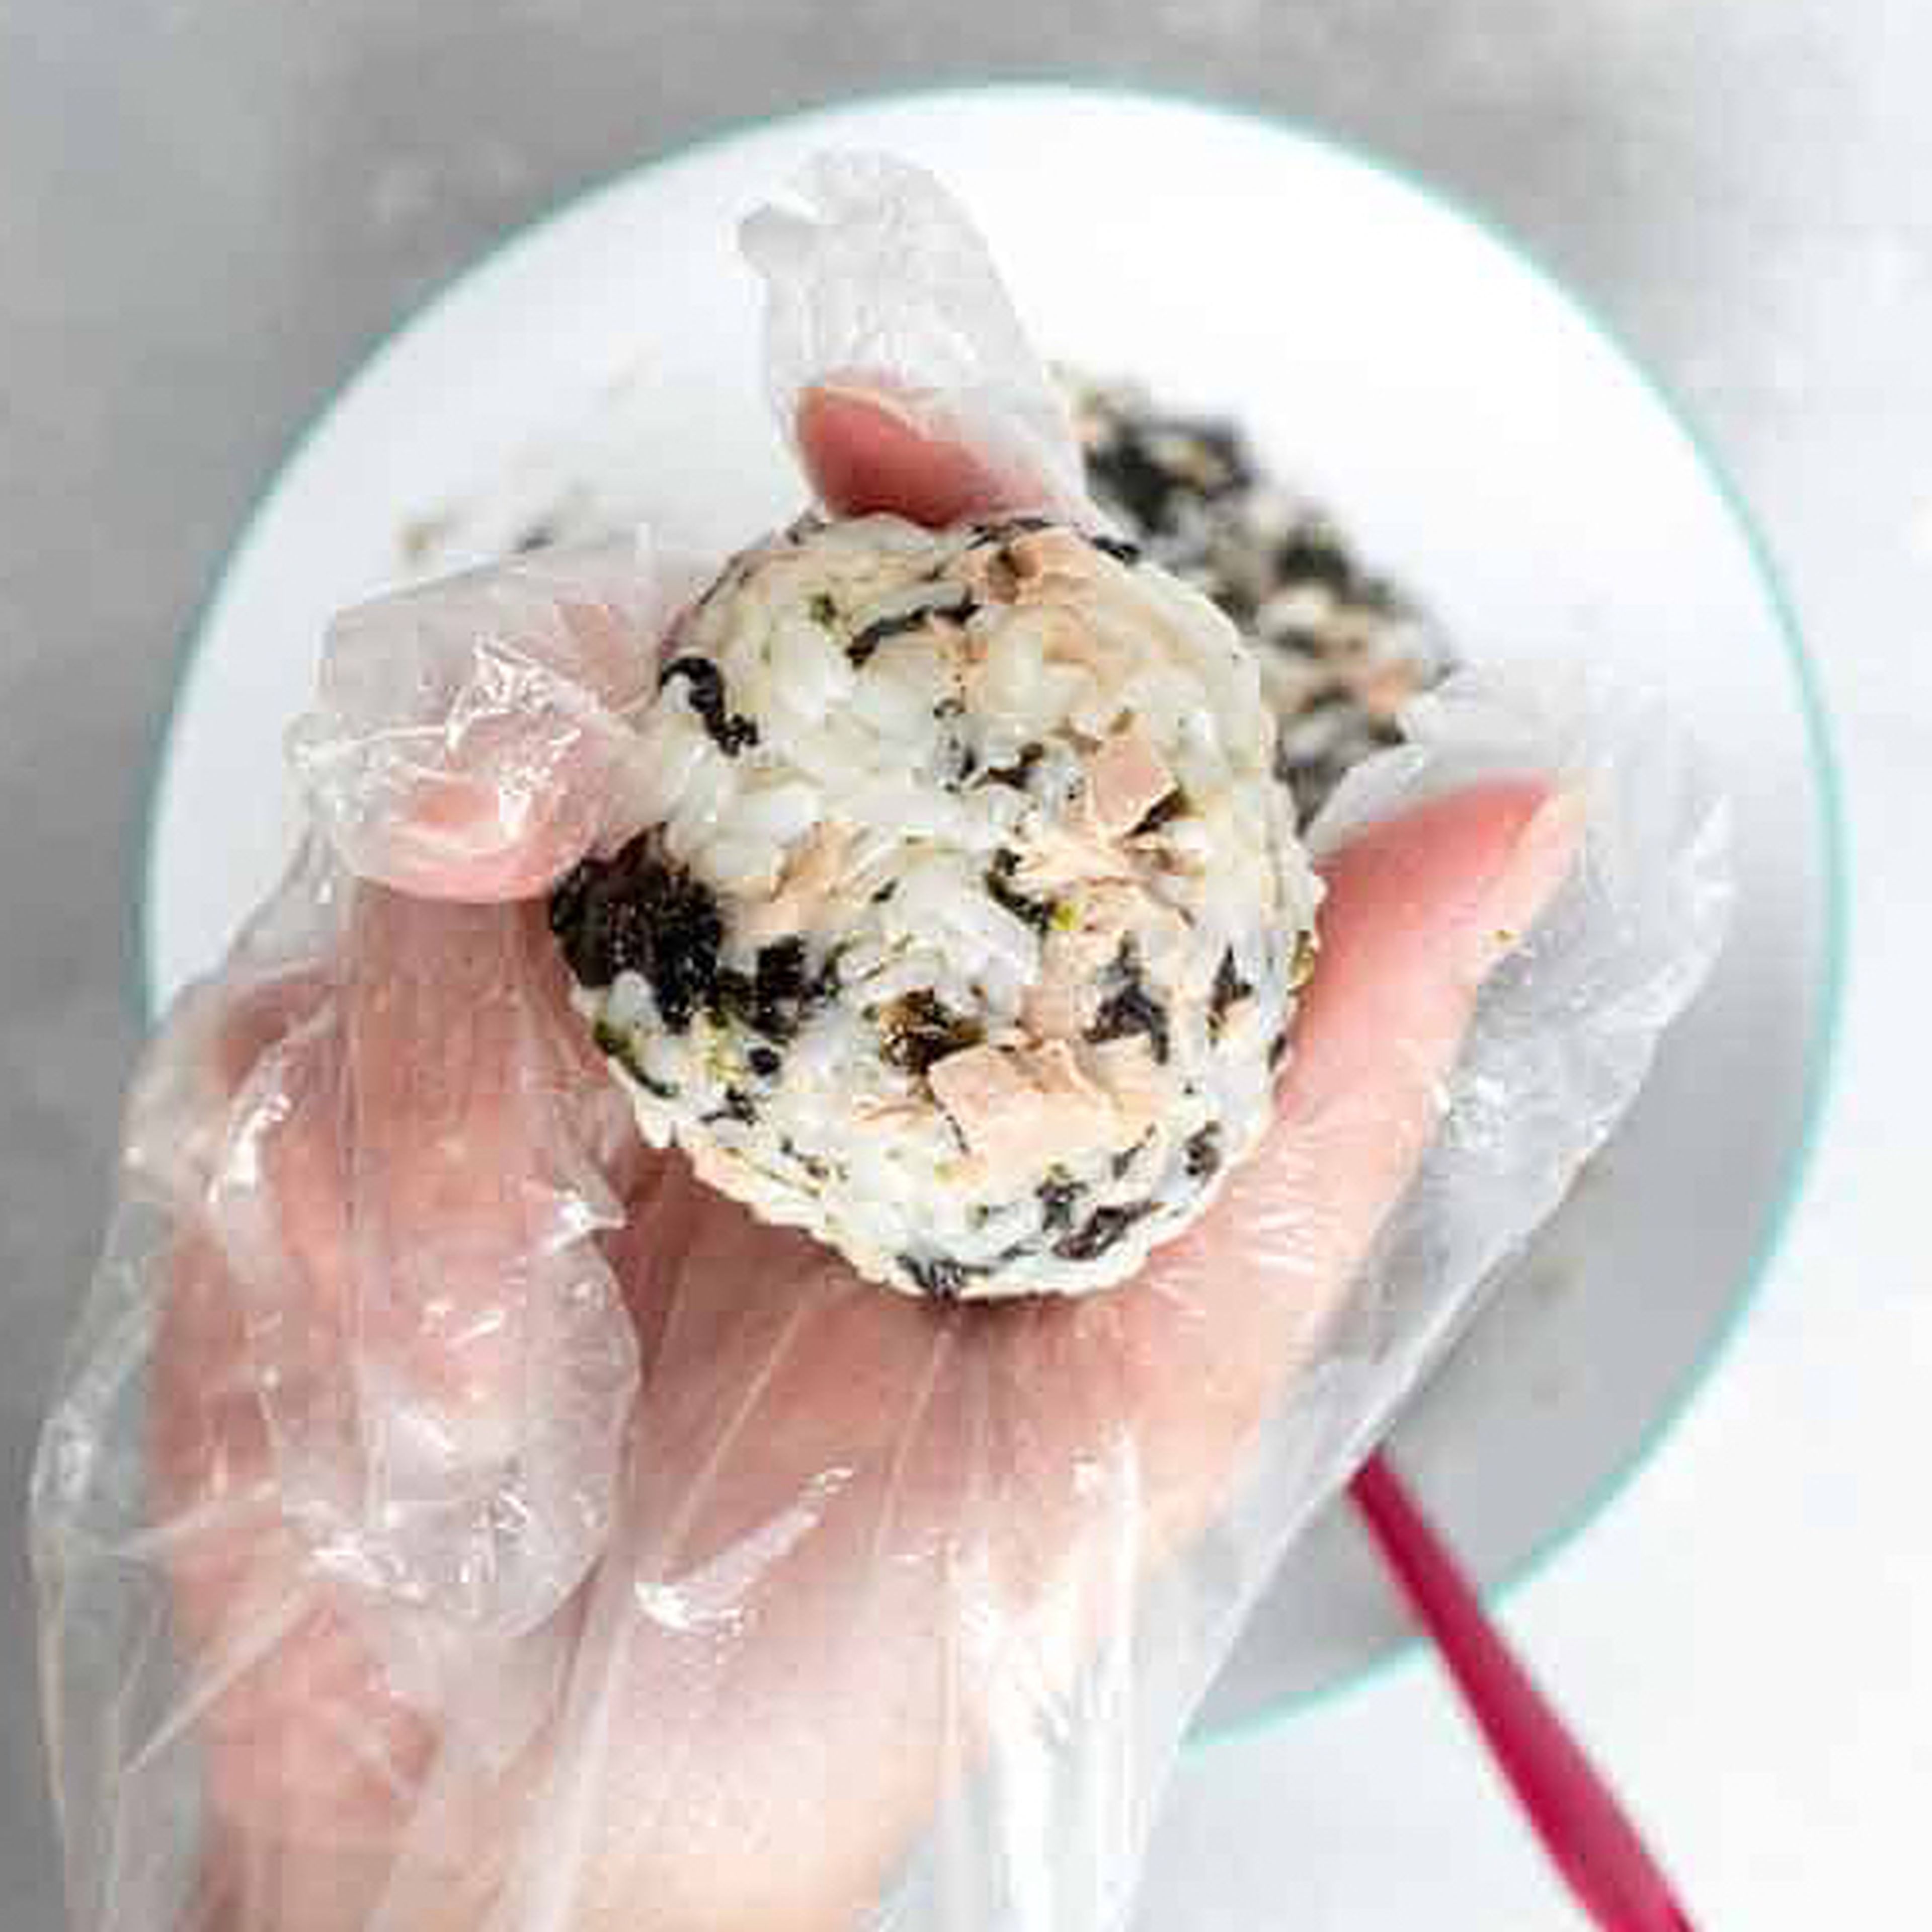 With clean hands or while wearing gloves, roll up each portion into a ball. Serve immediately.